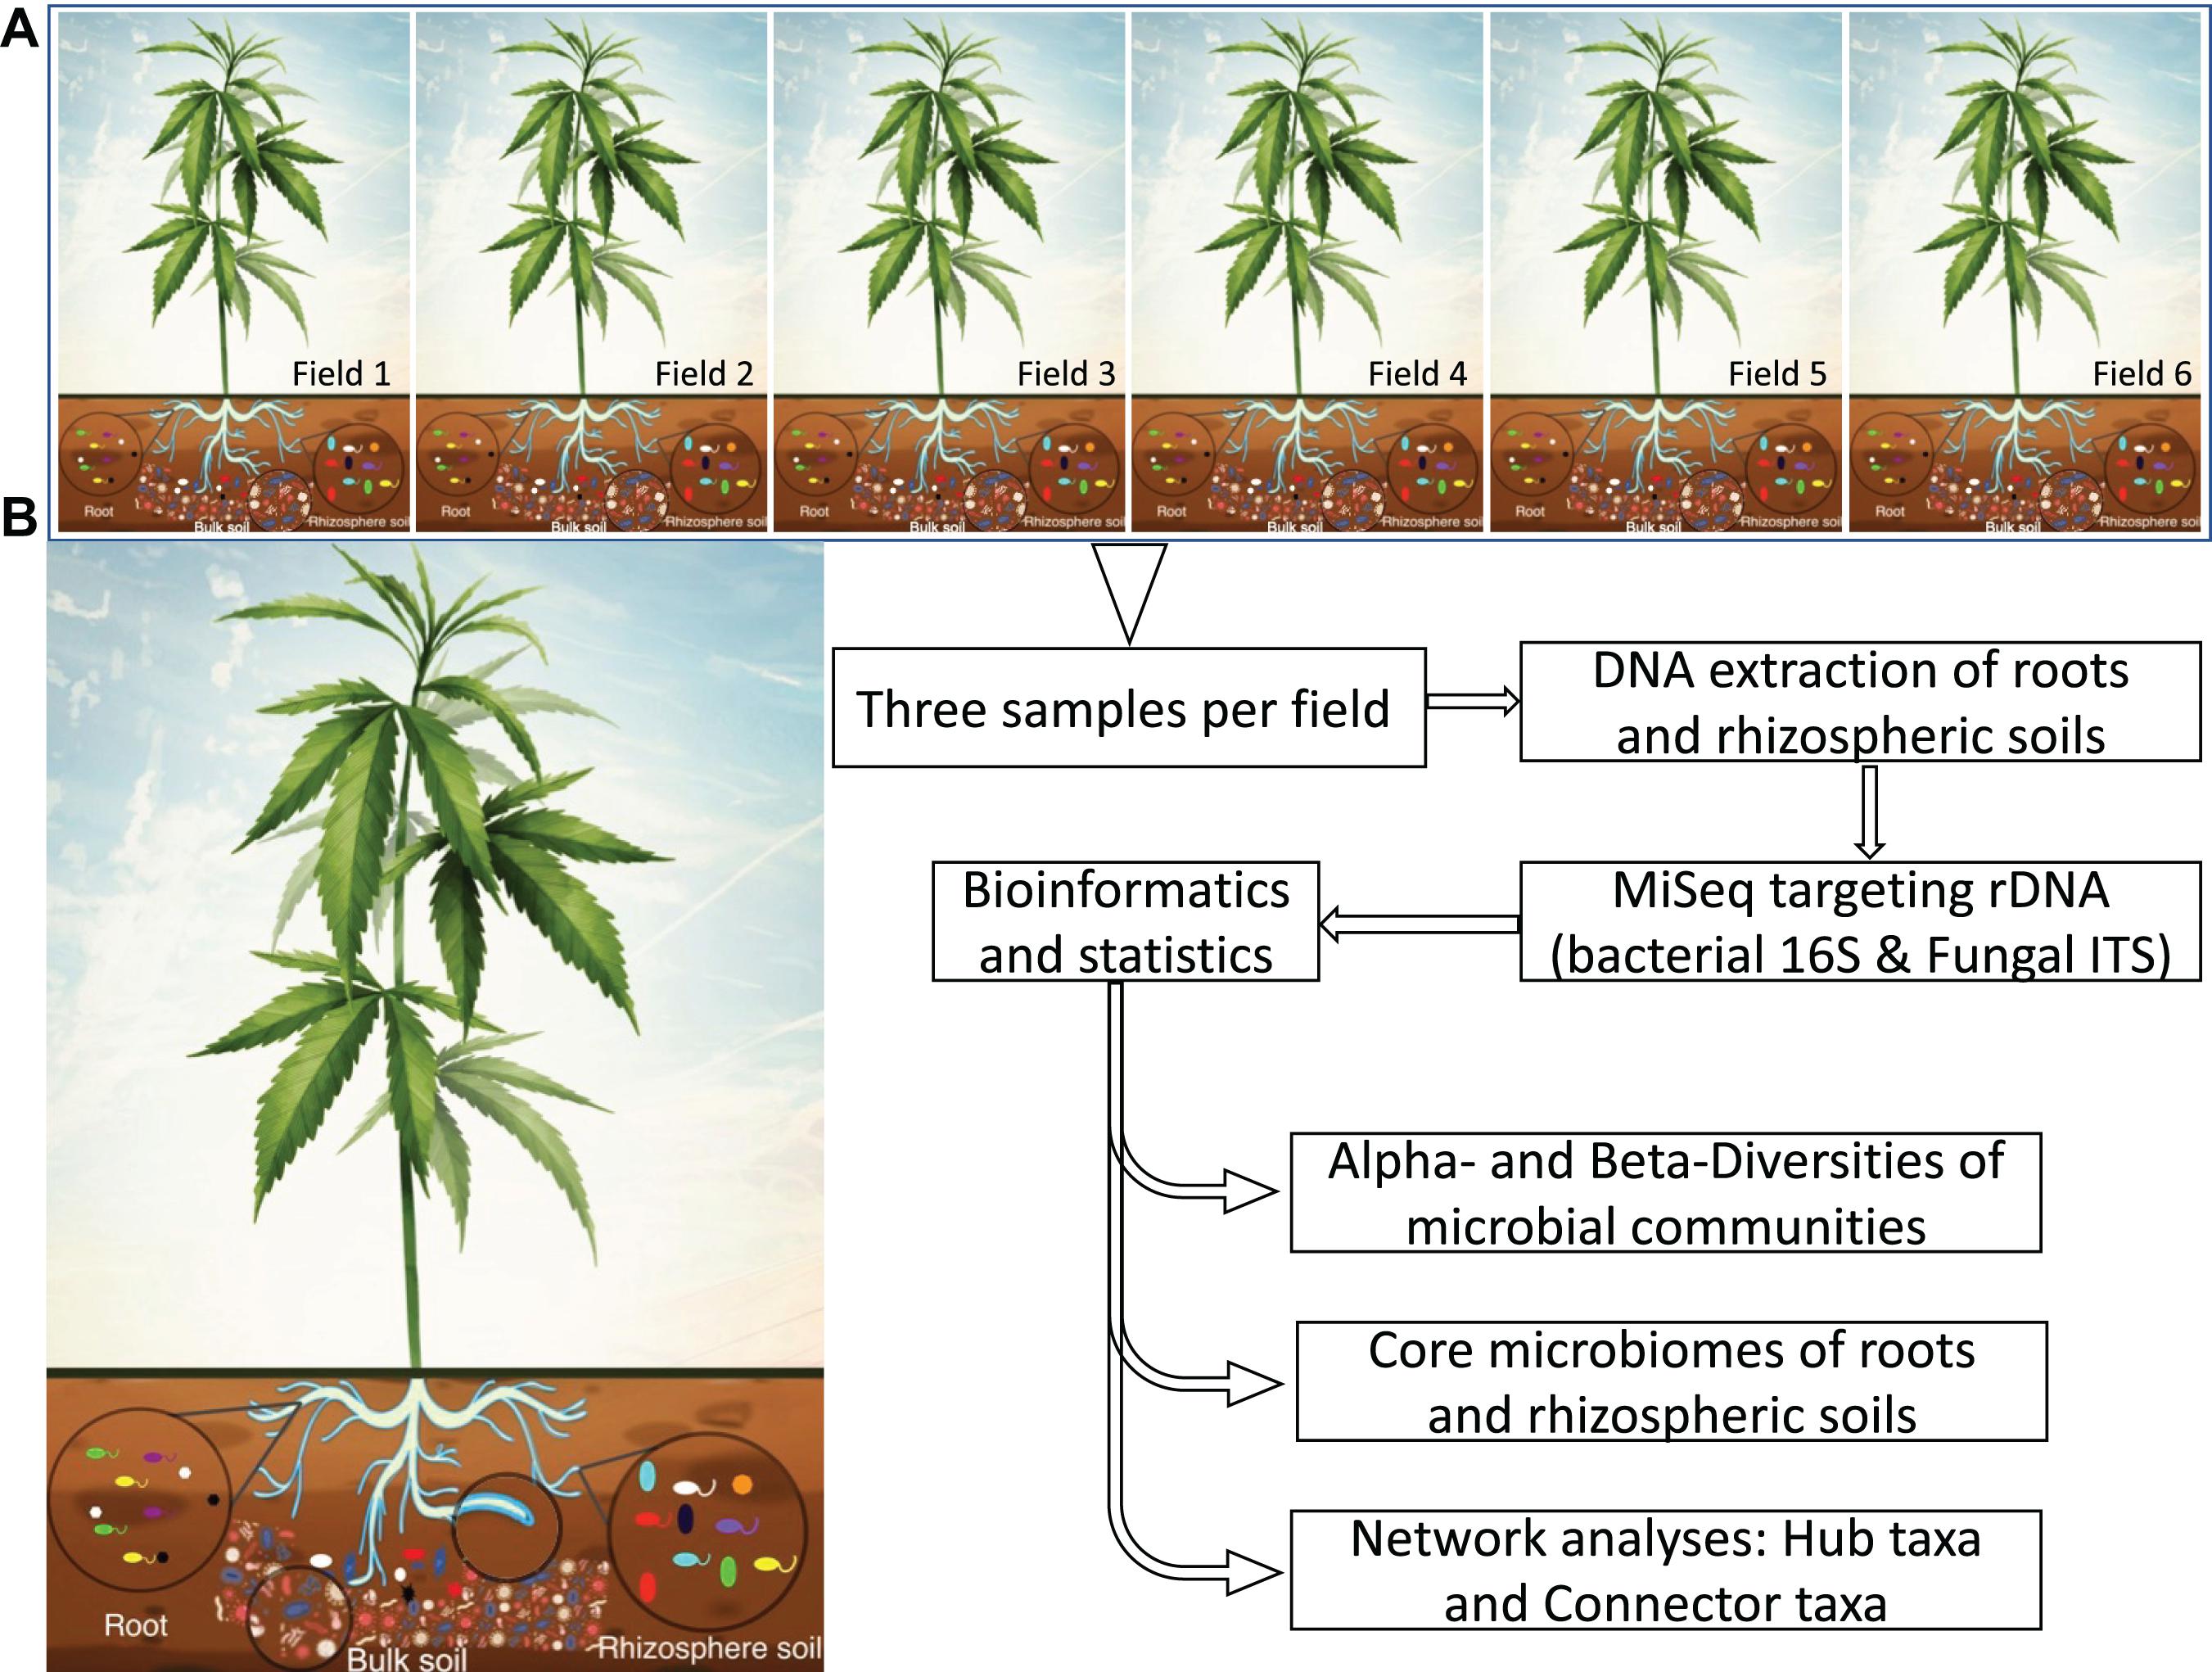 Frontiers | Microbiome of Field Grown Hemp Reveals Potential Microbial ...